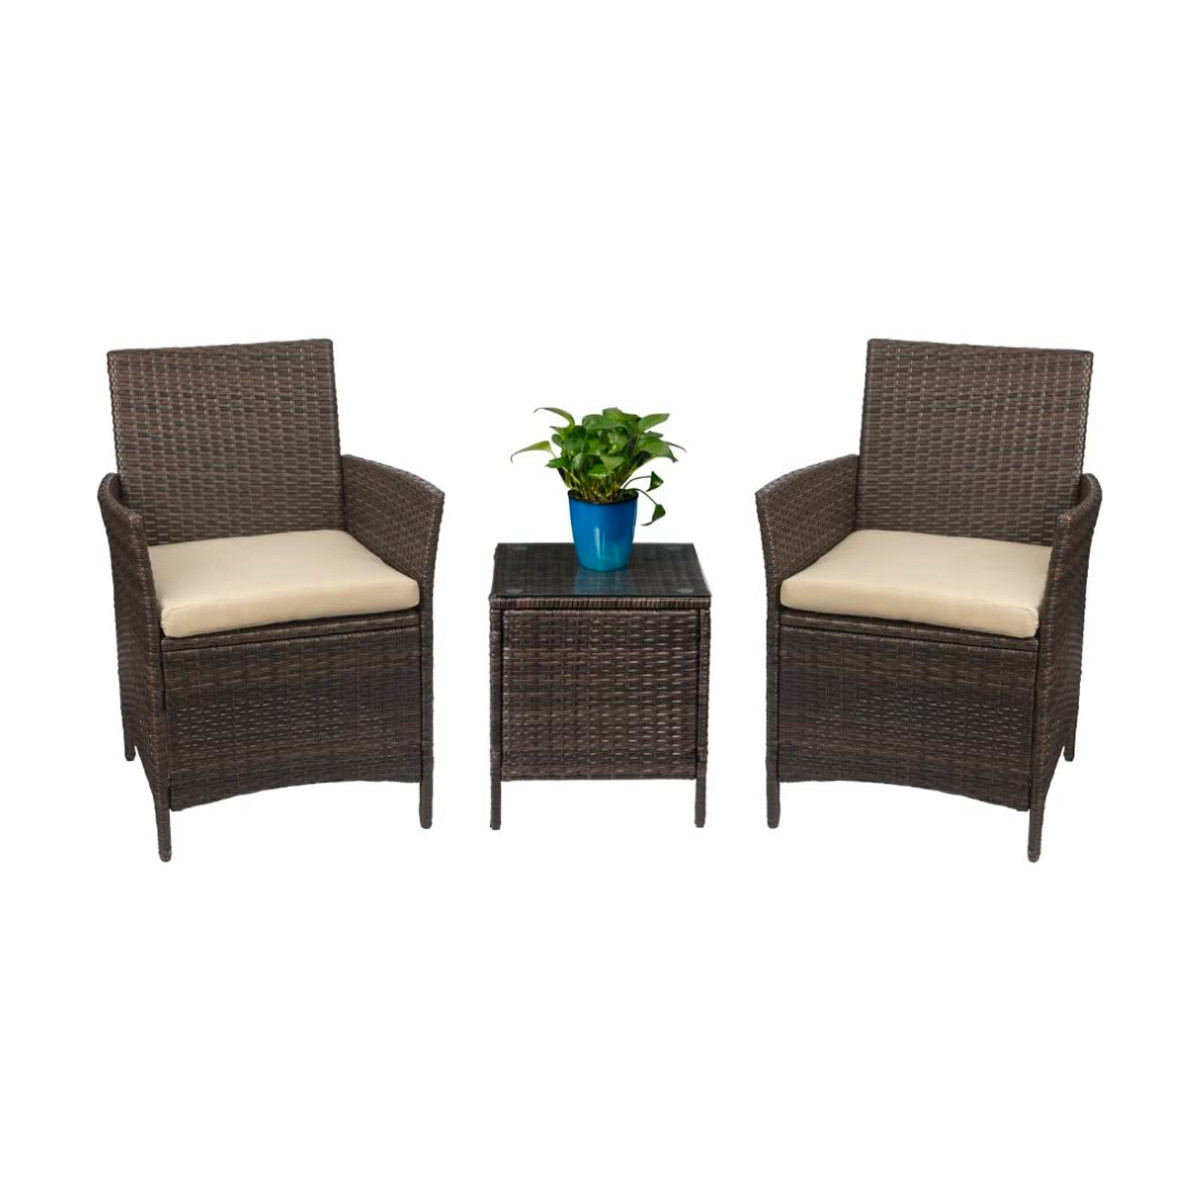 Devoko outdoor rattan chair set with table in brown and tan colors